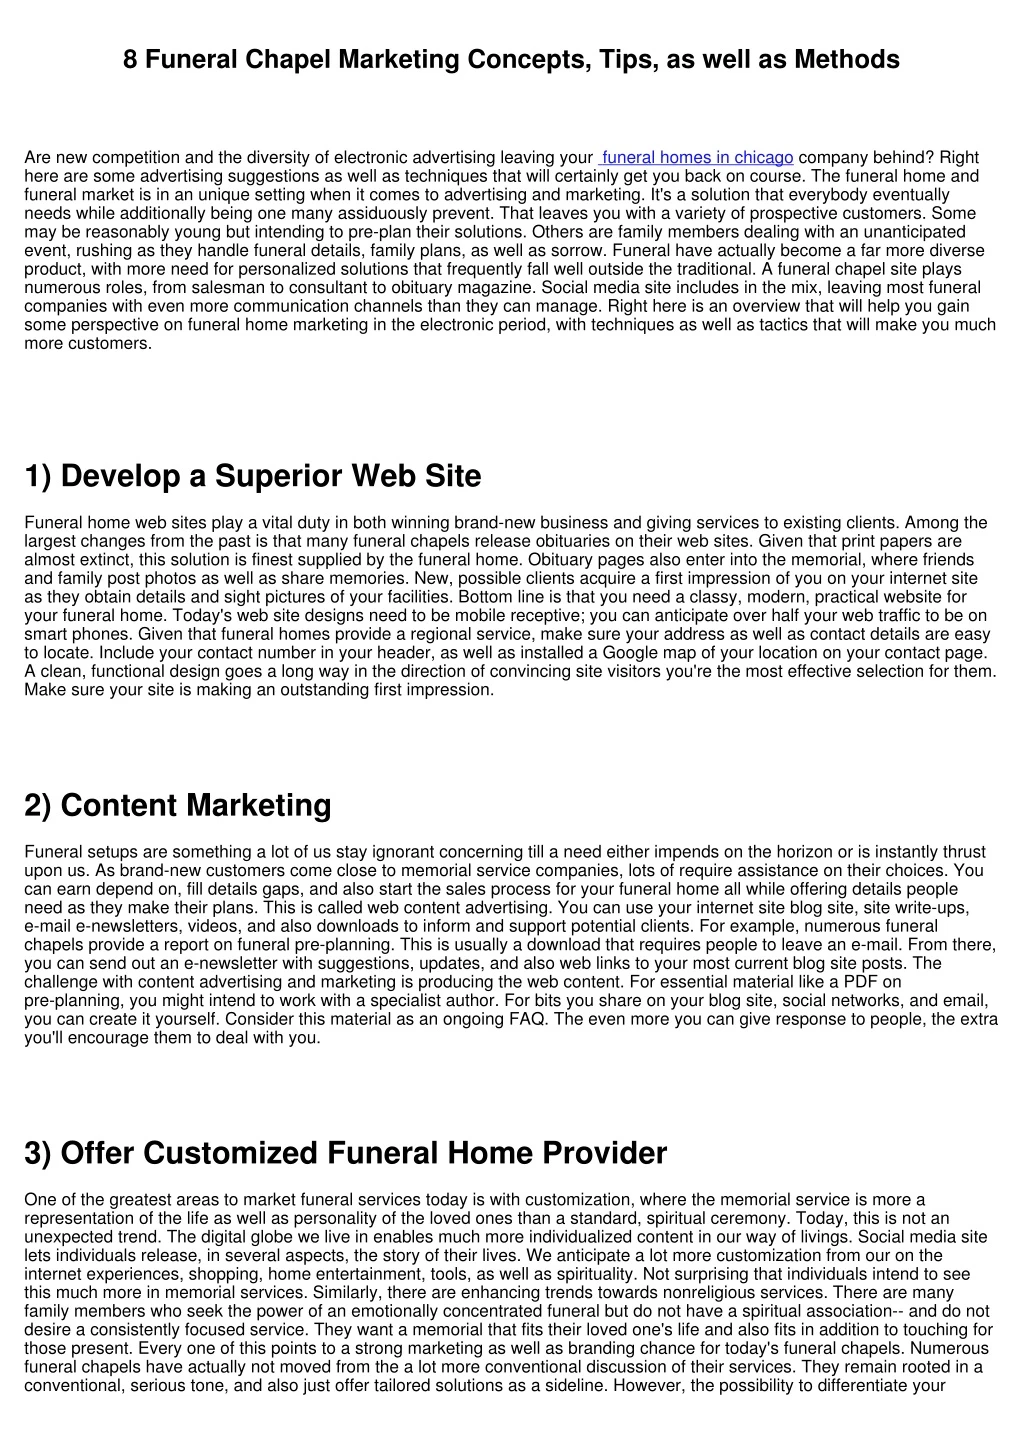 8 funeral chapel marketing concepts tips as well